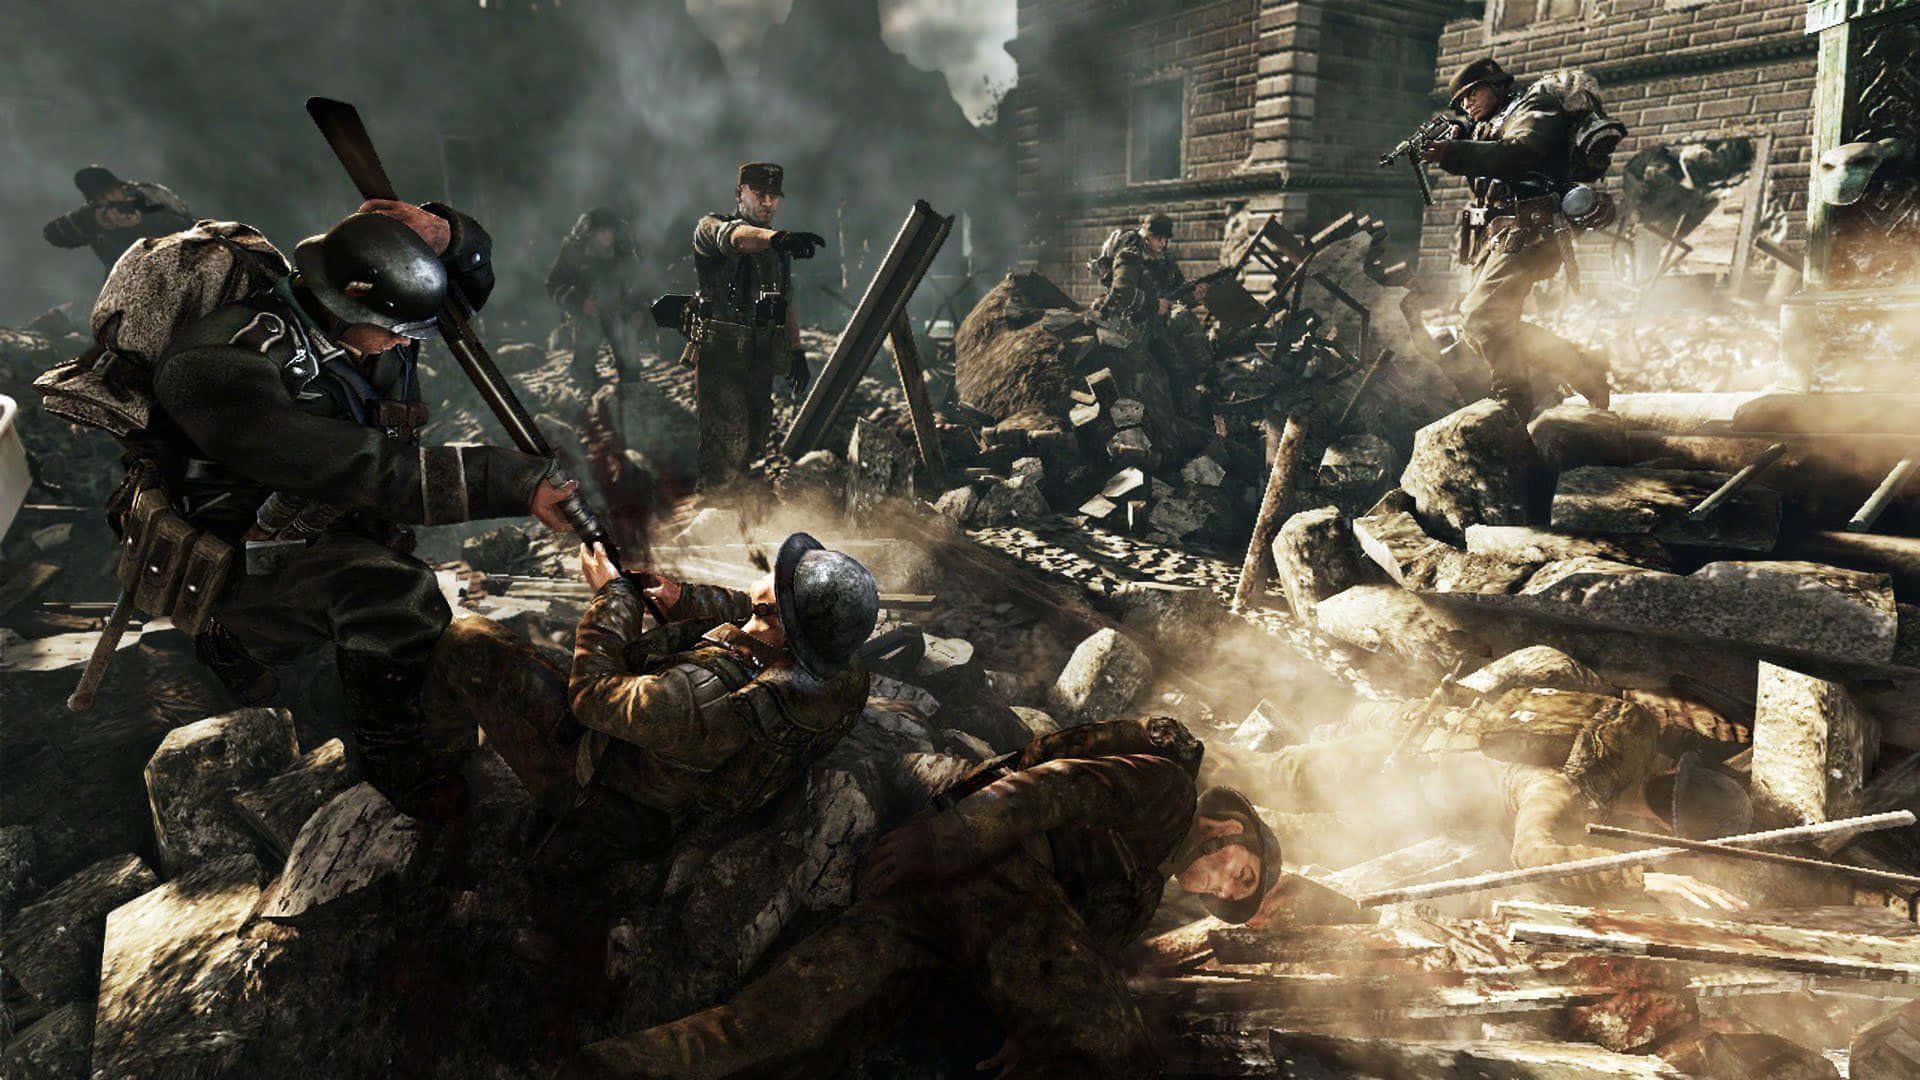 A Group Of Soldiers Are Fighting In A Ruined Area